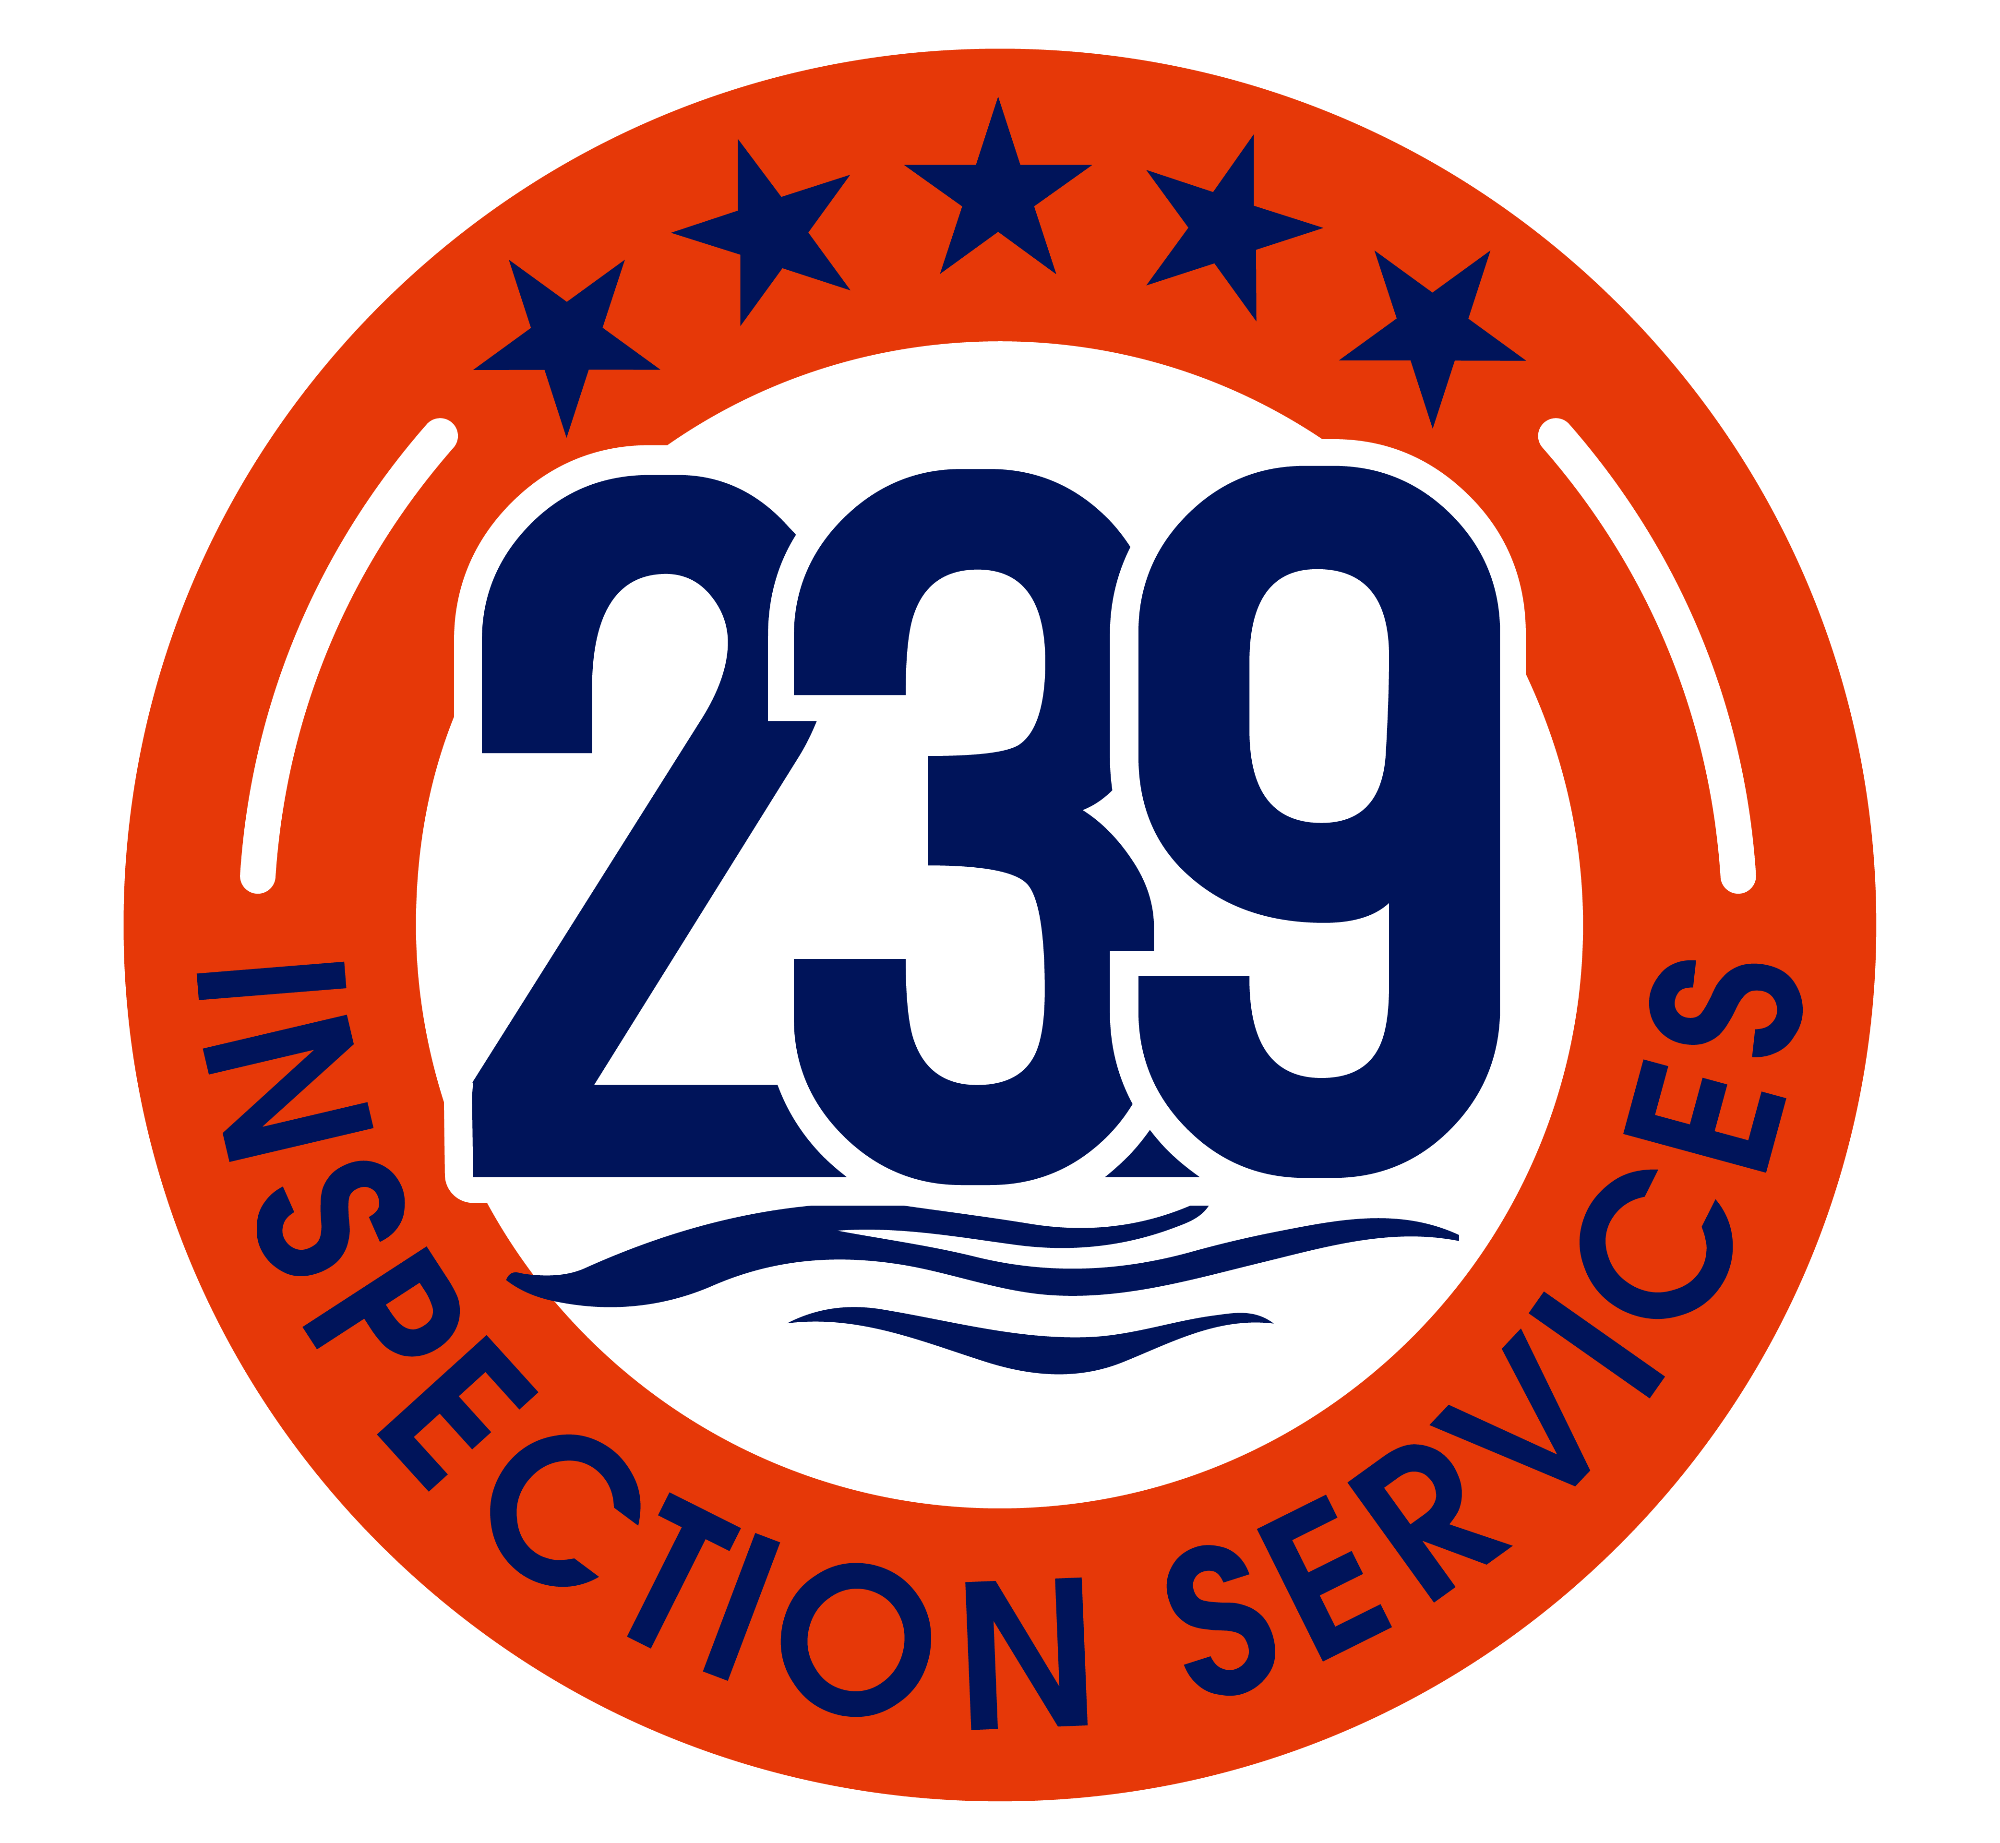 239 Inspection Services logo